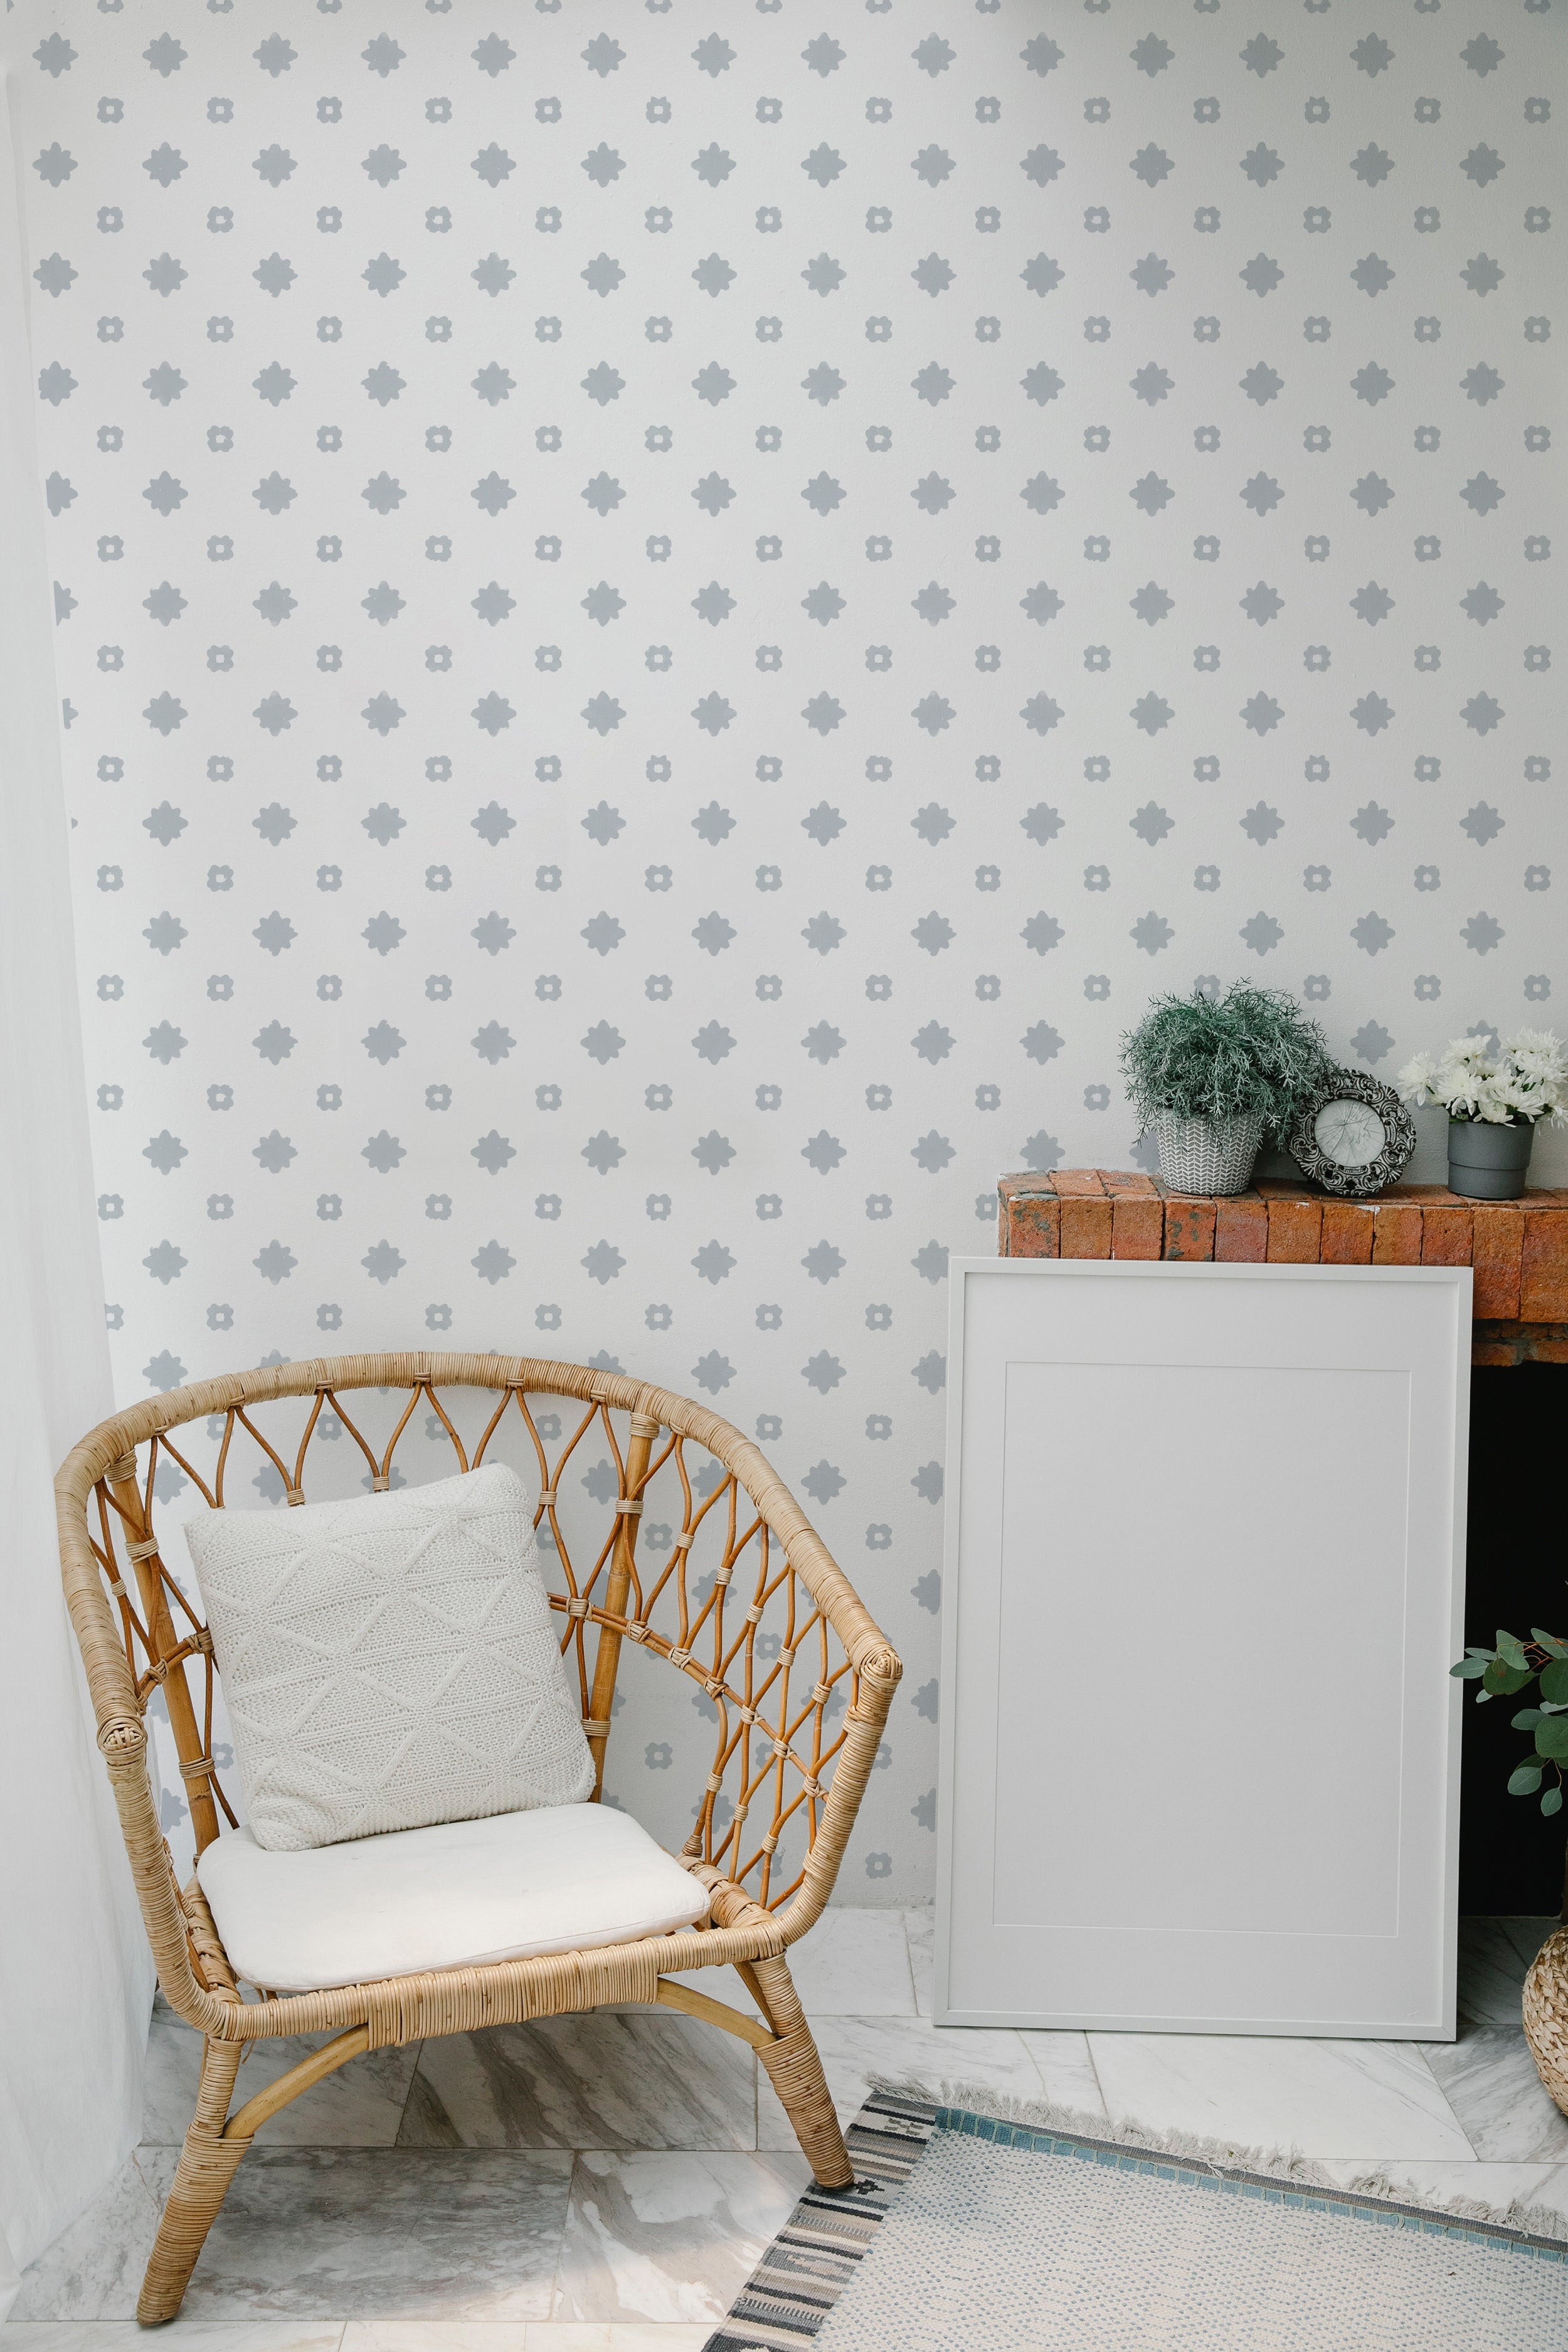 A detail of Friedrich Wallpaper showing the clean and minimalist design of light grey floral motifs scattered uniformly on a white background, perfect for creating a serene and uncluttered space.